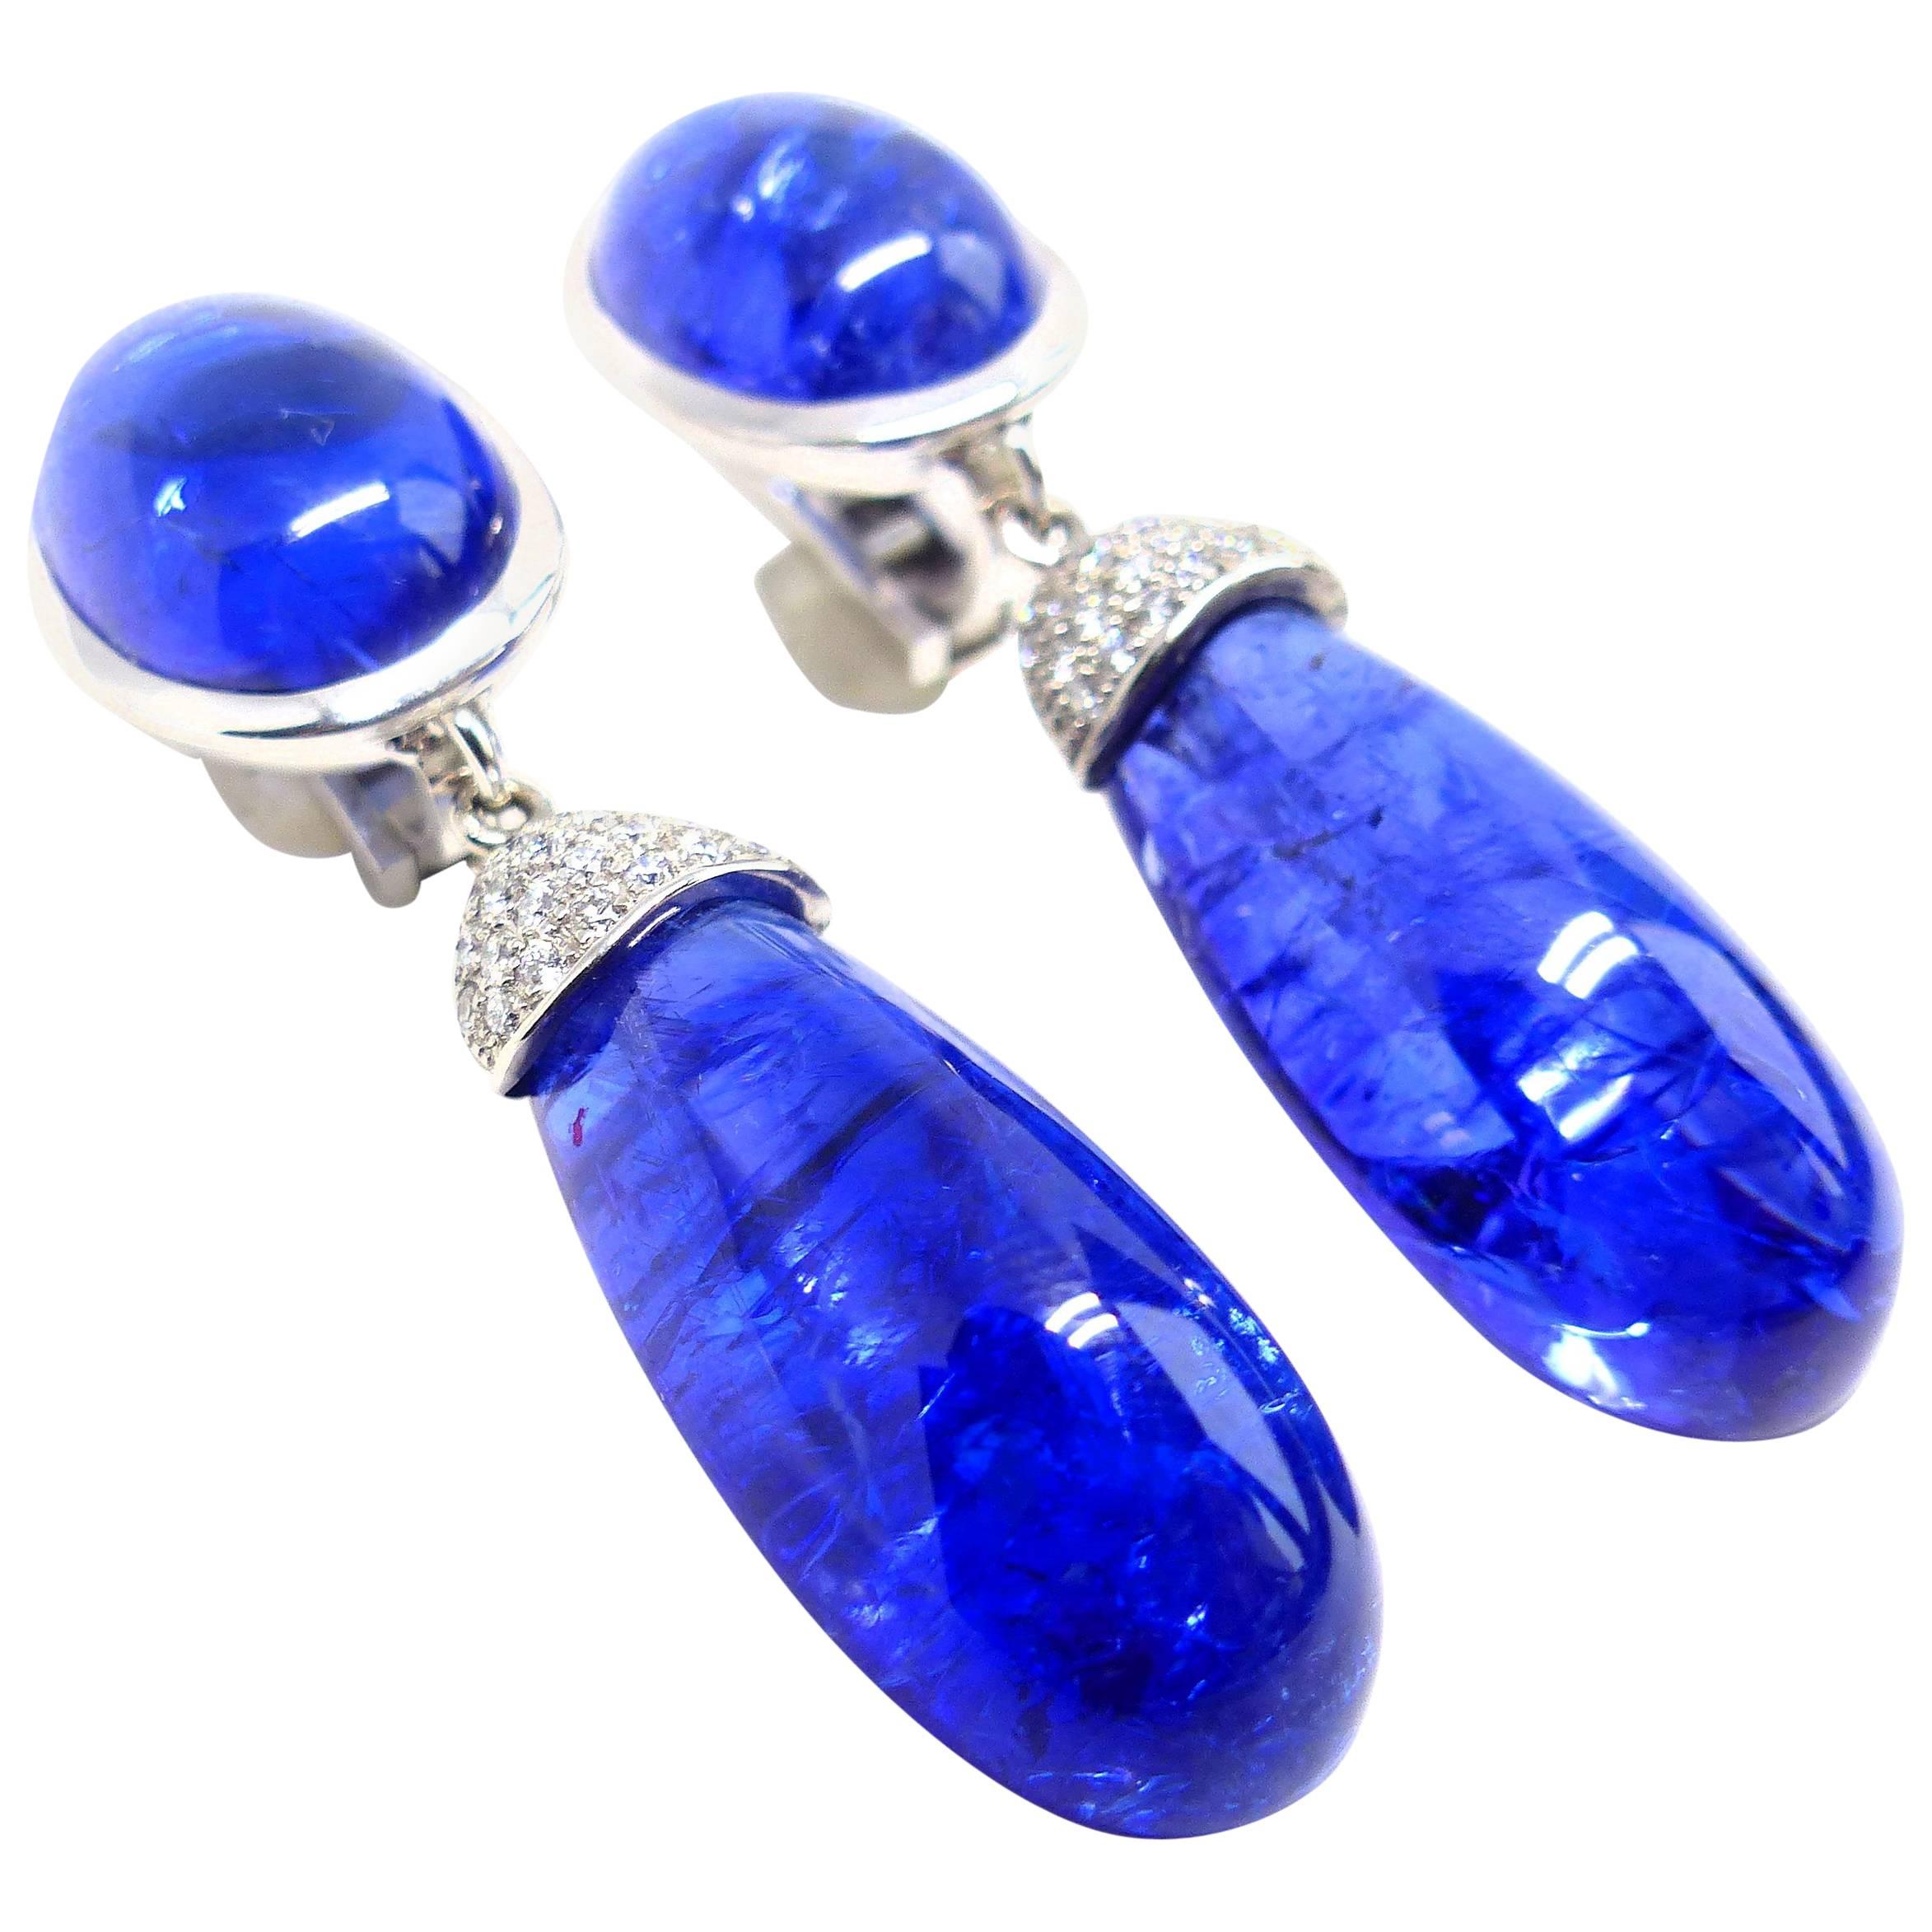 Thomas Leyser is renowned for his contemporary jewellery designs utilizing fine coloured gemstones and diamonds. 

These pair of earrings in 18K white gold (13.38g) are set with 2x fine Tanzanite Cabouchons (oval, 16x12mm, 21.76ct). + 2x Tanzanite